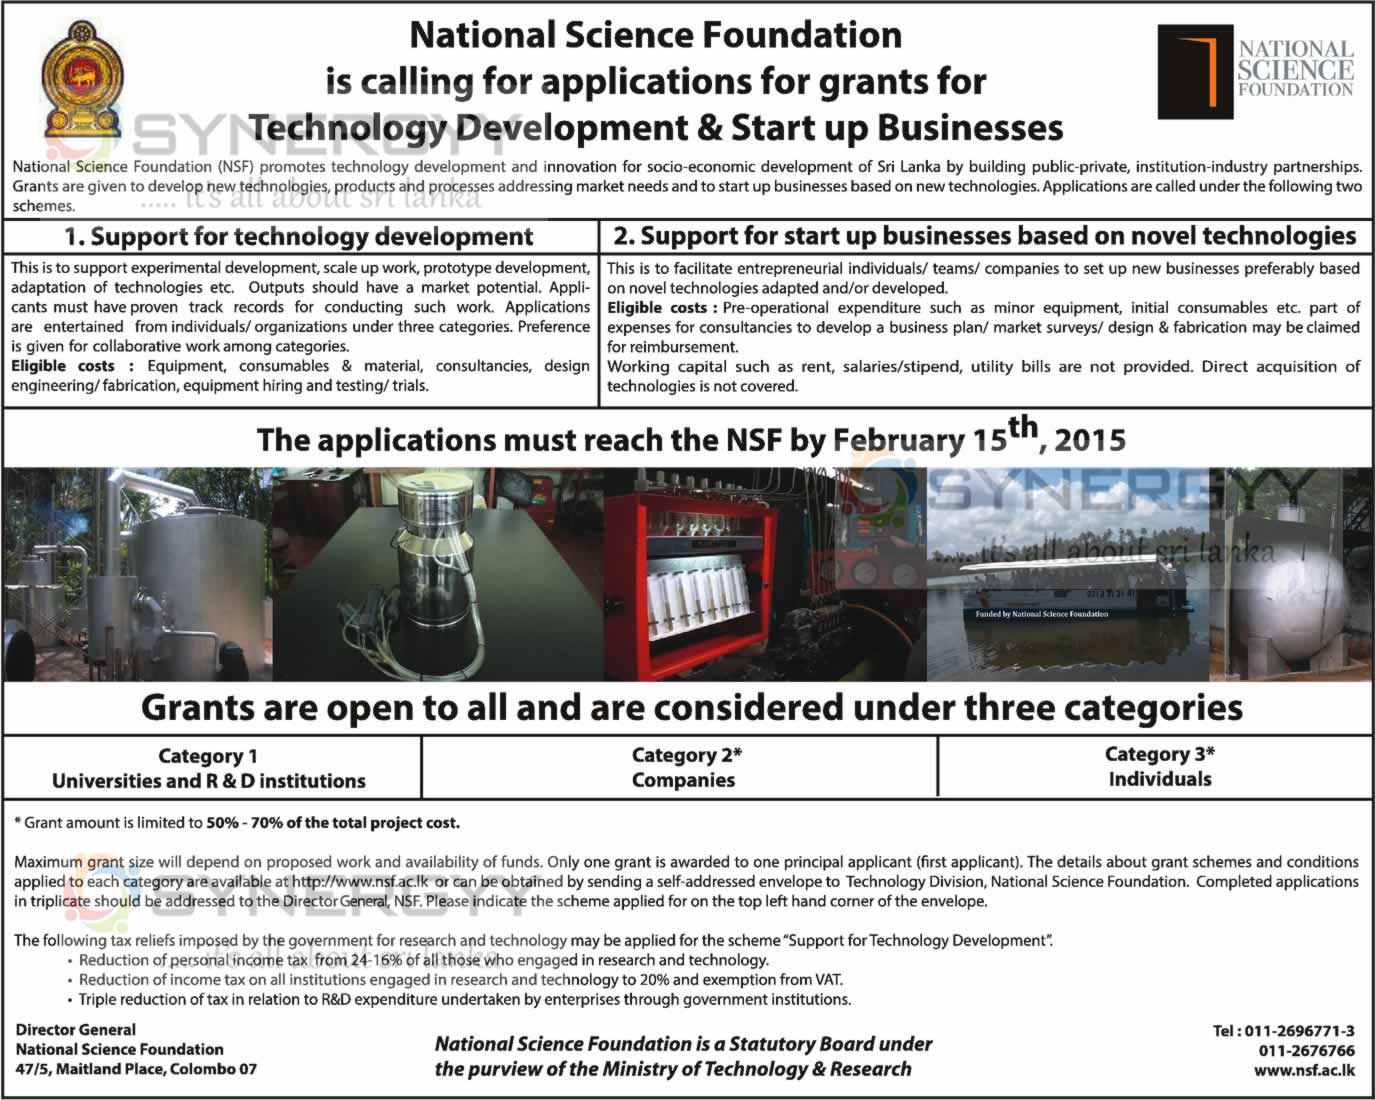 National Science Foundation is calling for applications for grants for Technology Development & Start up Businesses